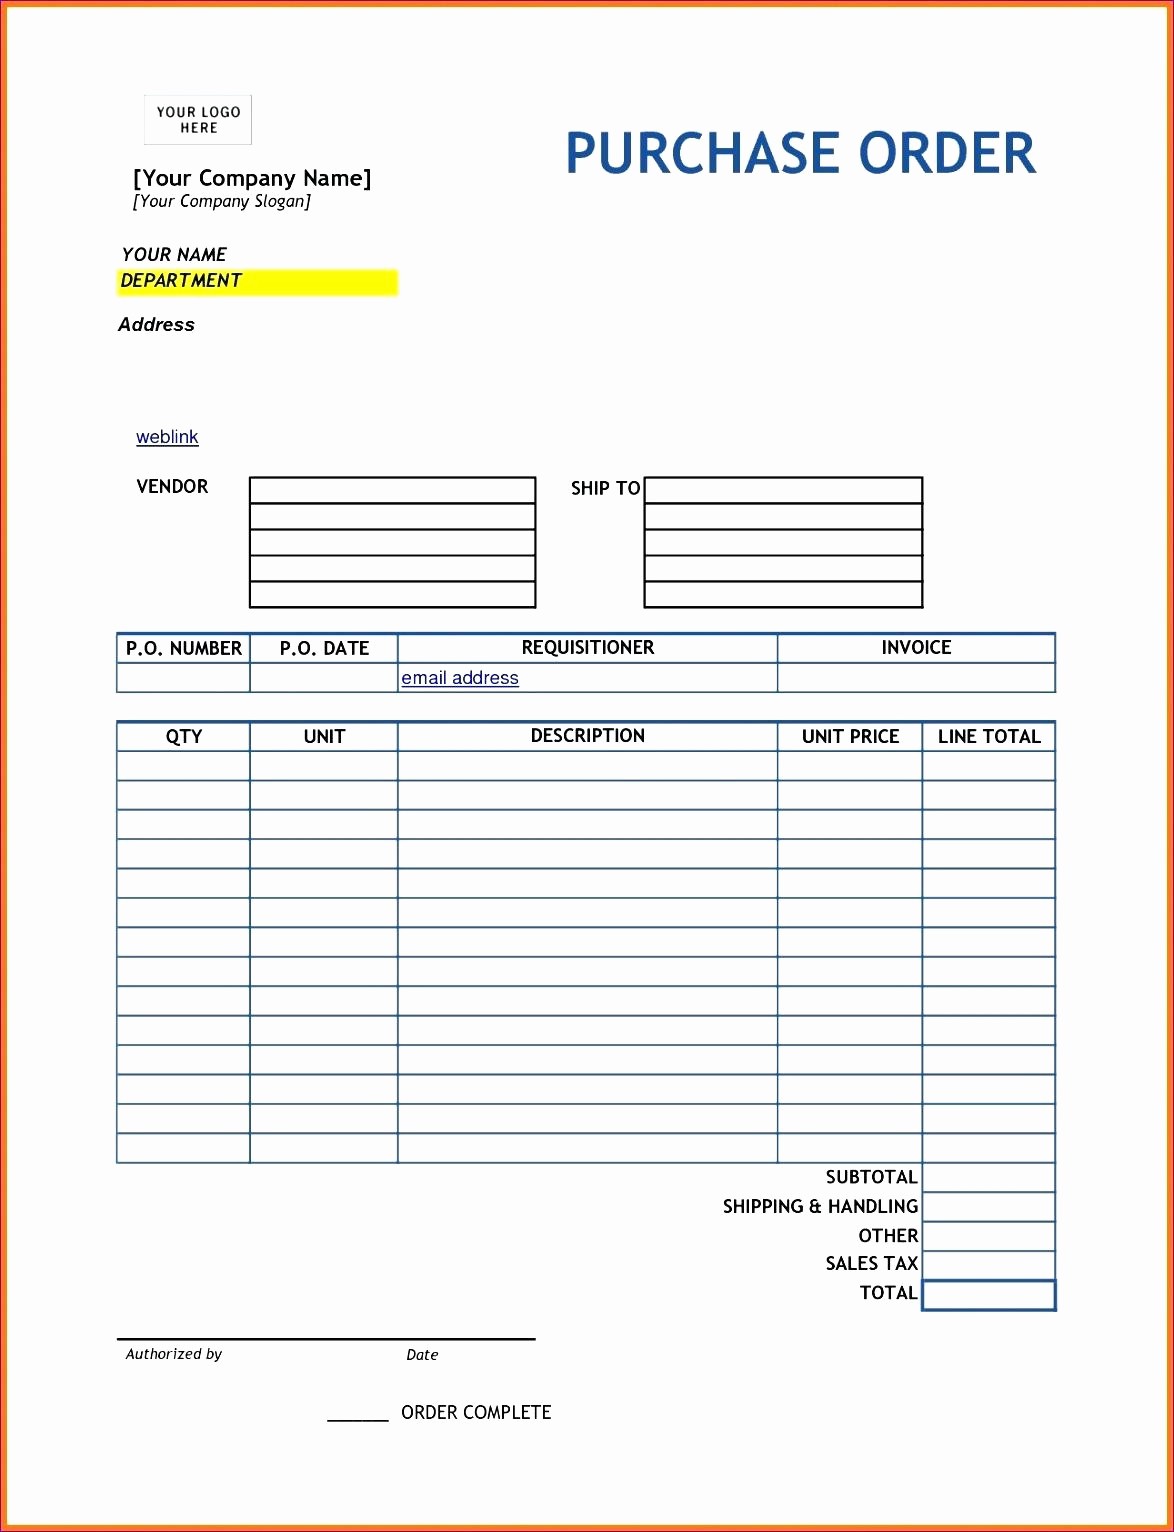 Excel Purchase order Template Free Beautiful Template Microsoft Excel forms Template